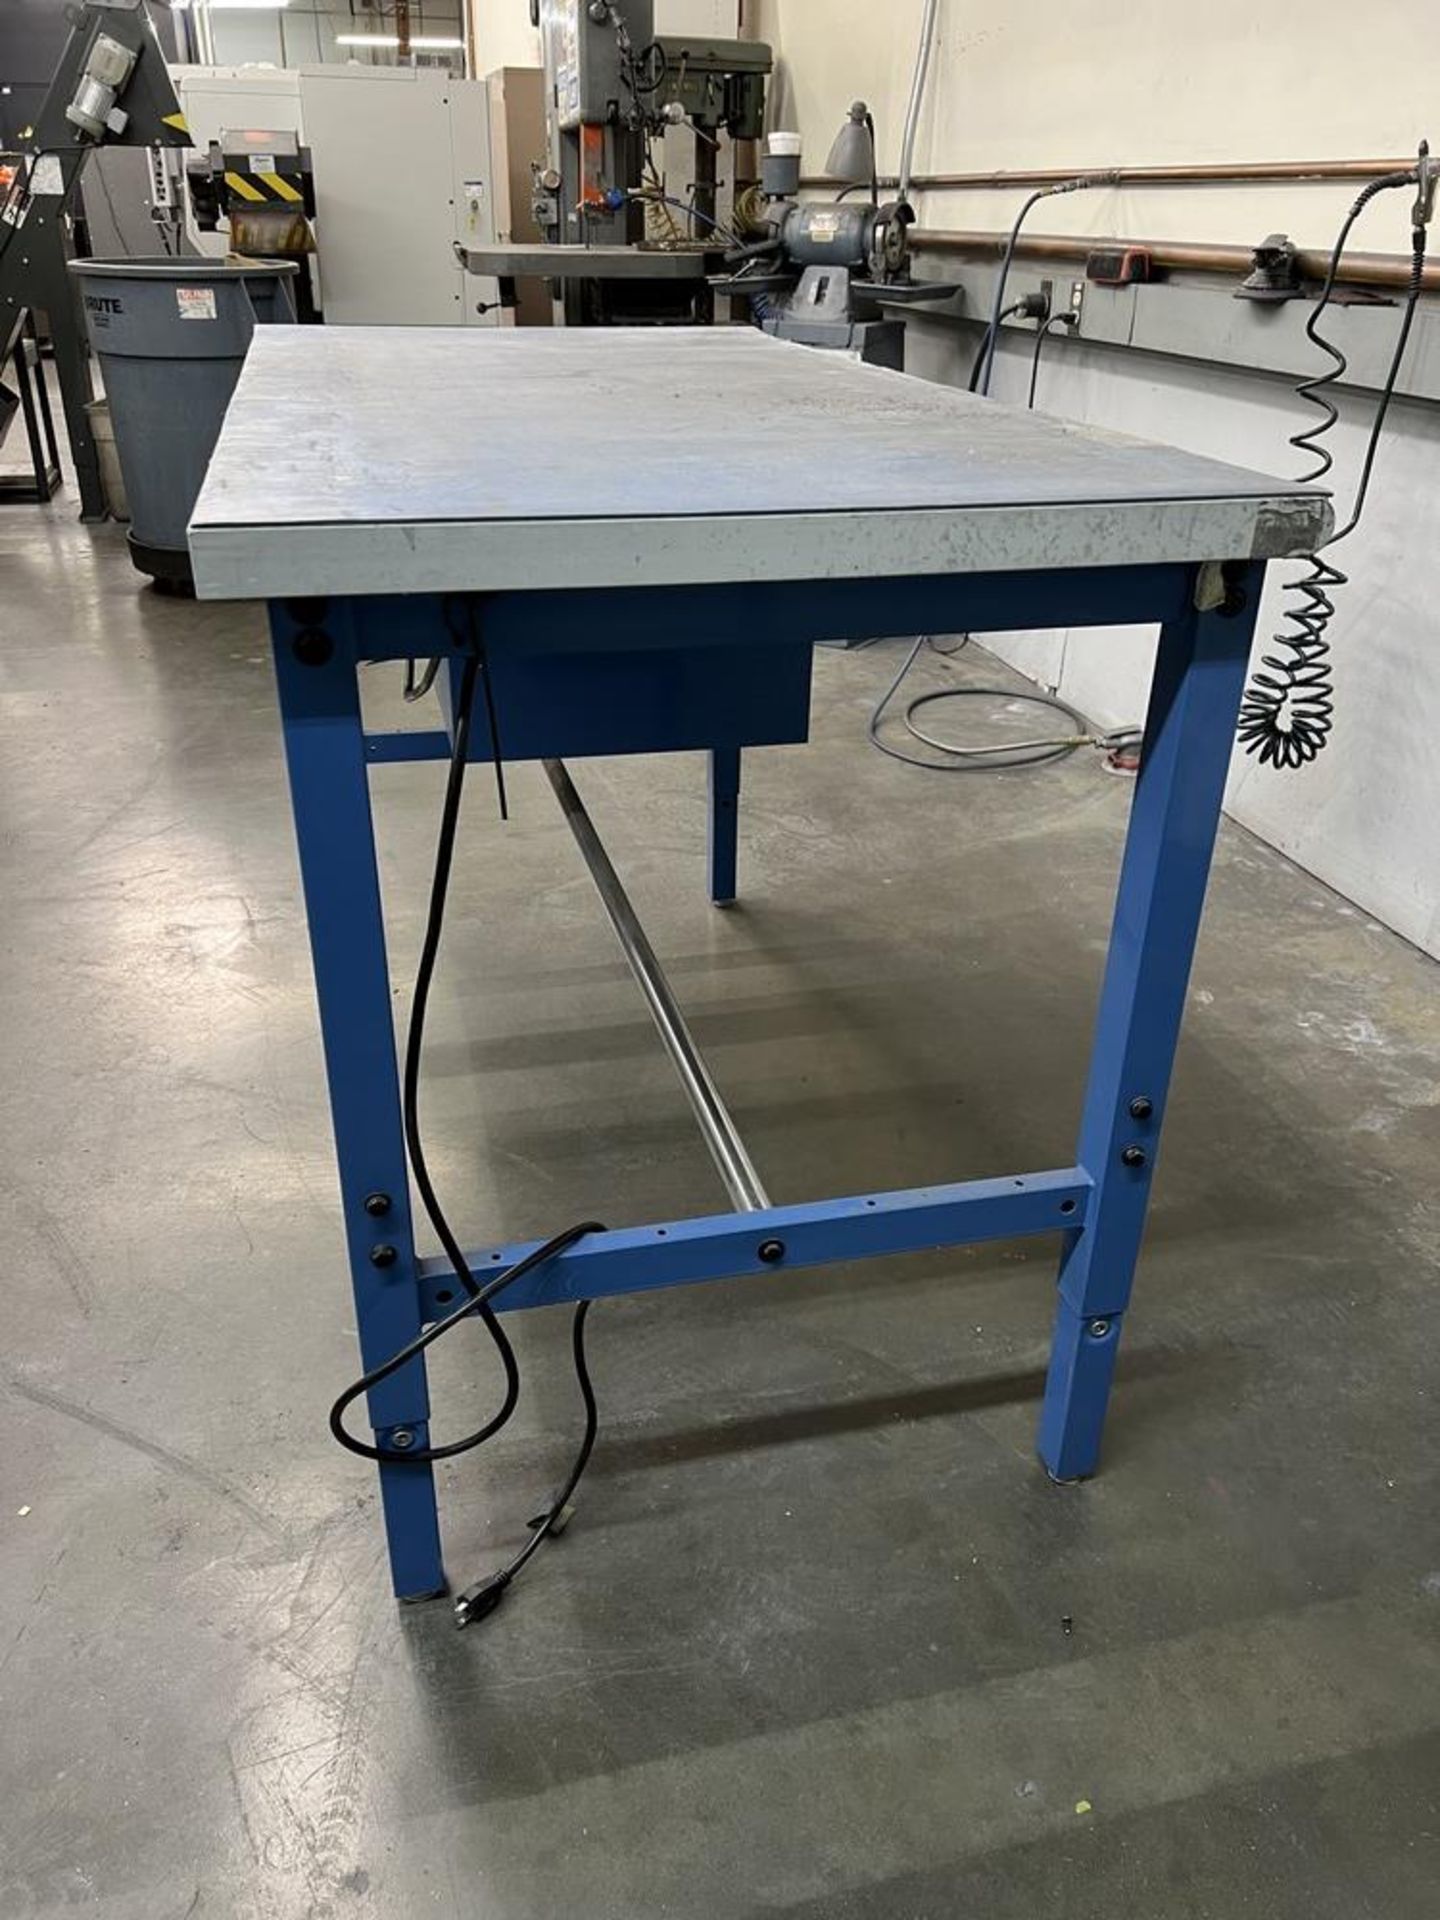 Global Industrial Adjustable Work Table With Power Strip 60" x 30" x 30" - Image 5 of 5